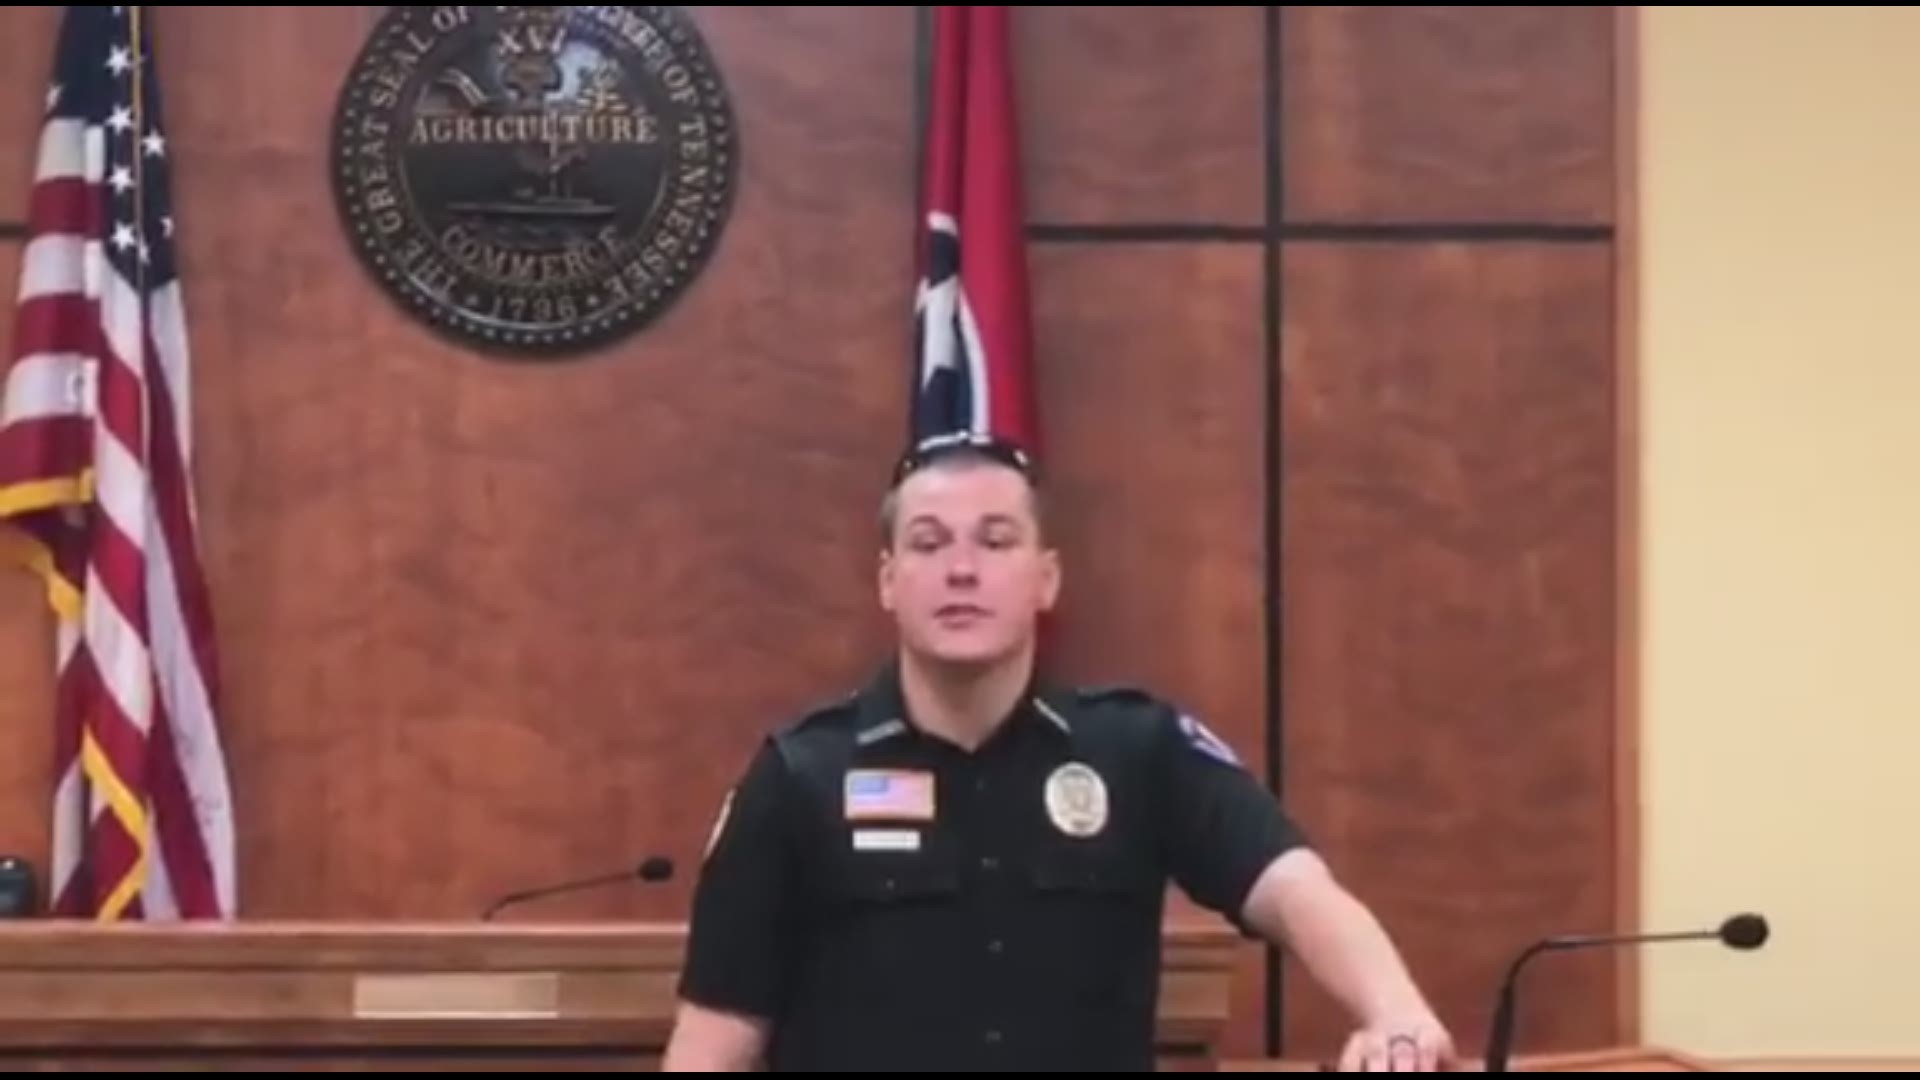 Enjoy the Scott Co. Sheriff's Office's contribution to the lip sync challenge